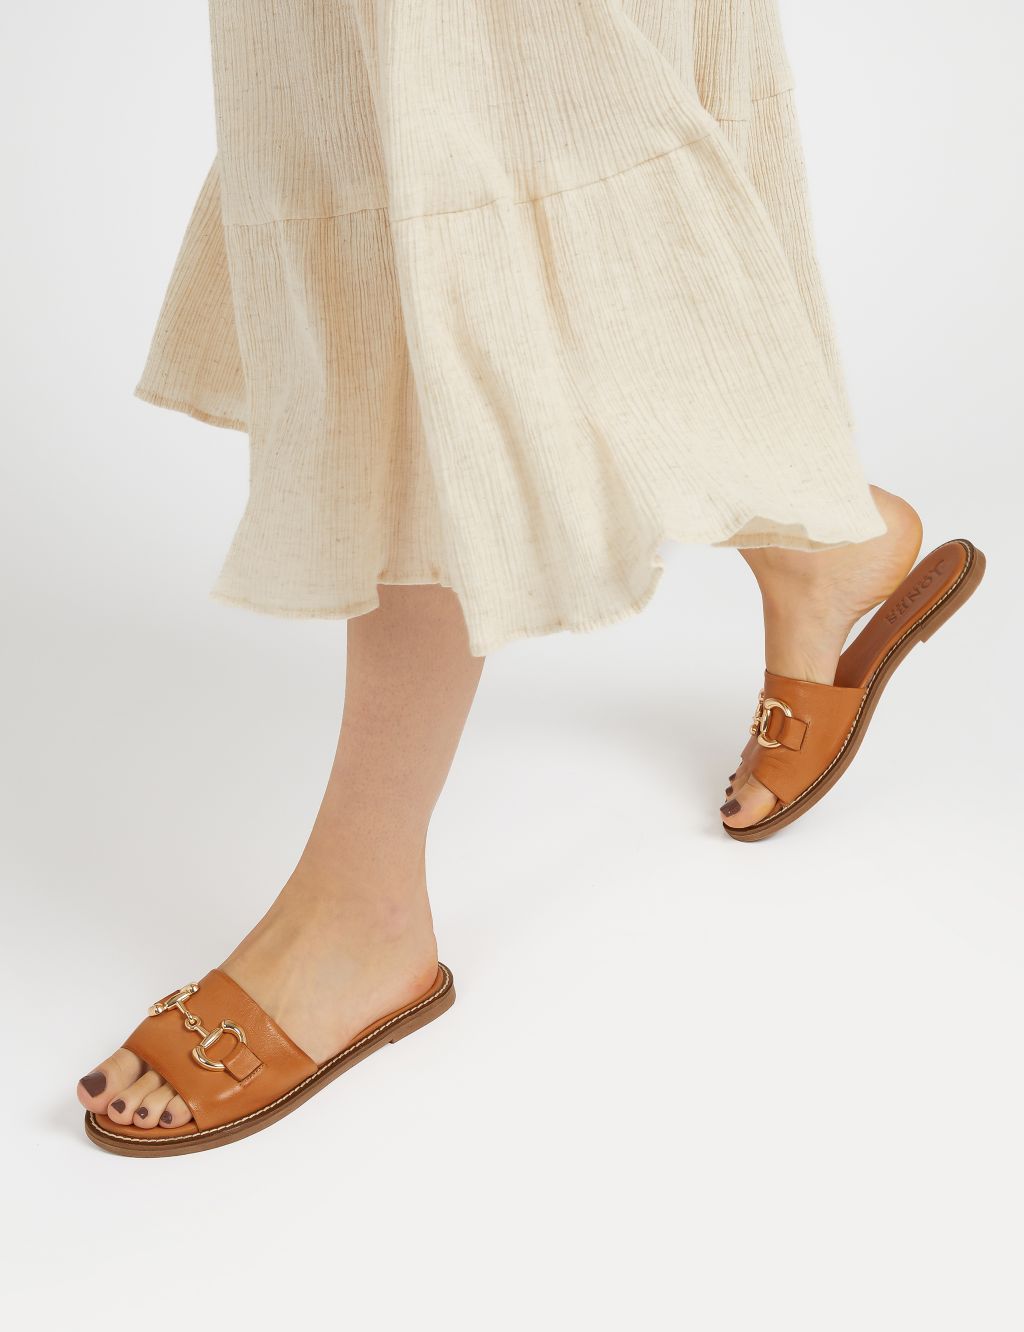 Leather Ring Detail Flat Mules image 1